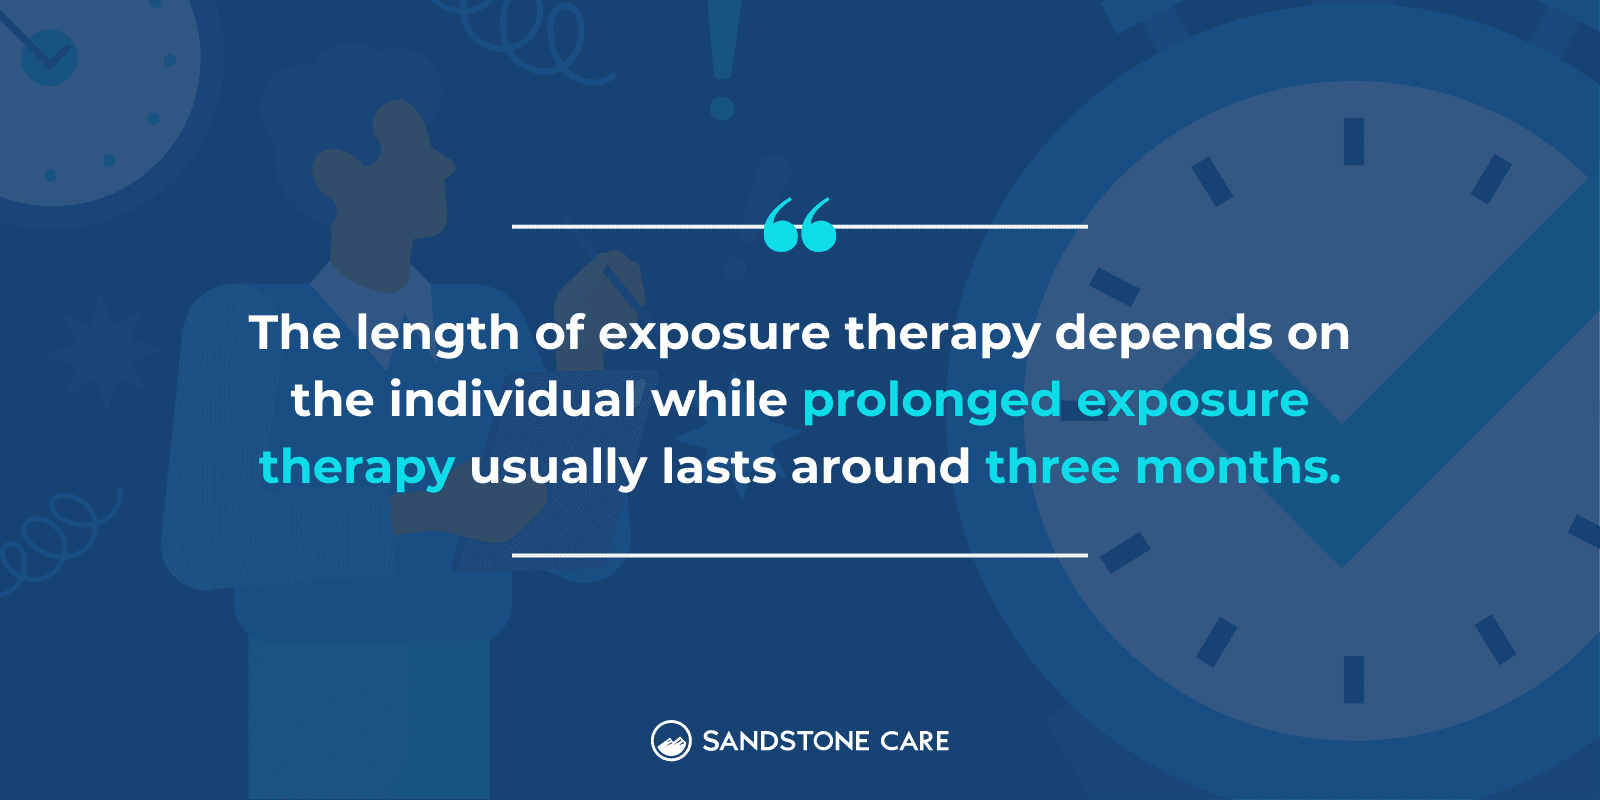 "The length of exposure therapy depends on the individual while prolonged exposure therapy usually lasts around three months." written above a person looking at the clock